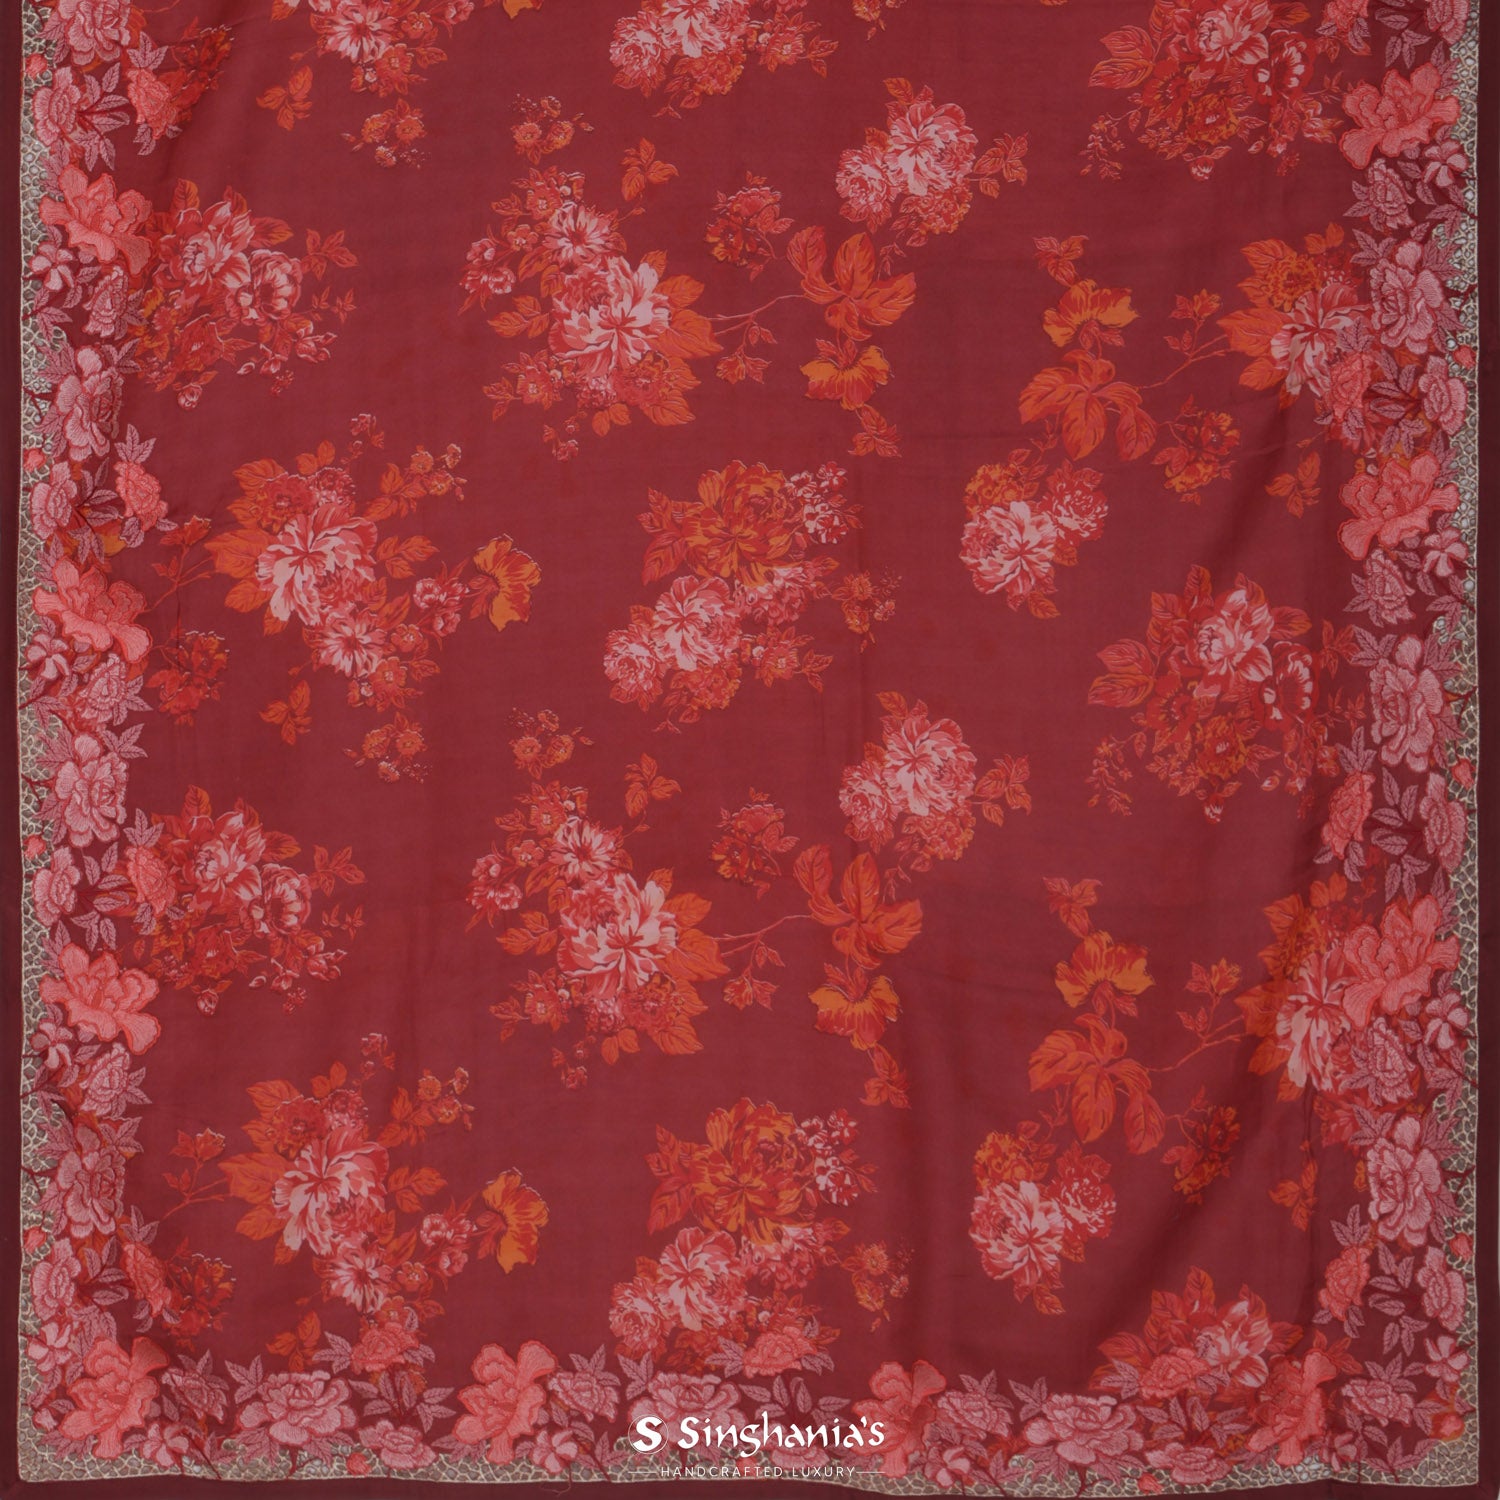 English Red Printed Satin Silk Saree With Floral Pattern